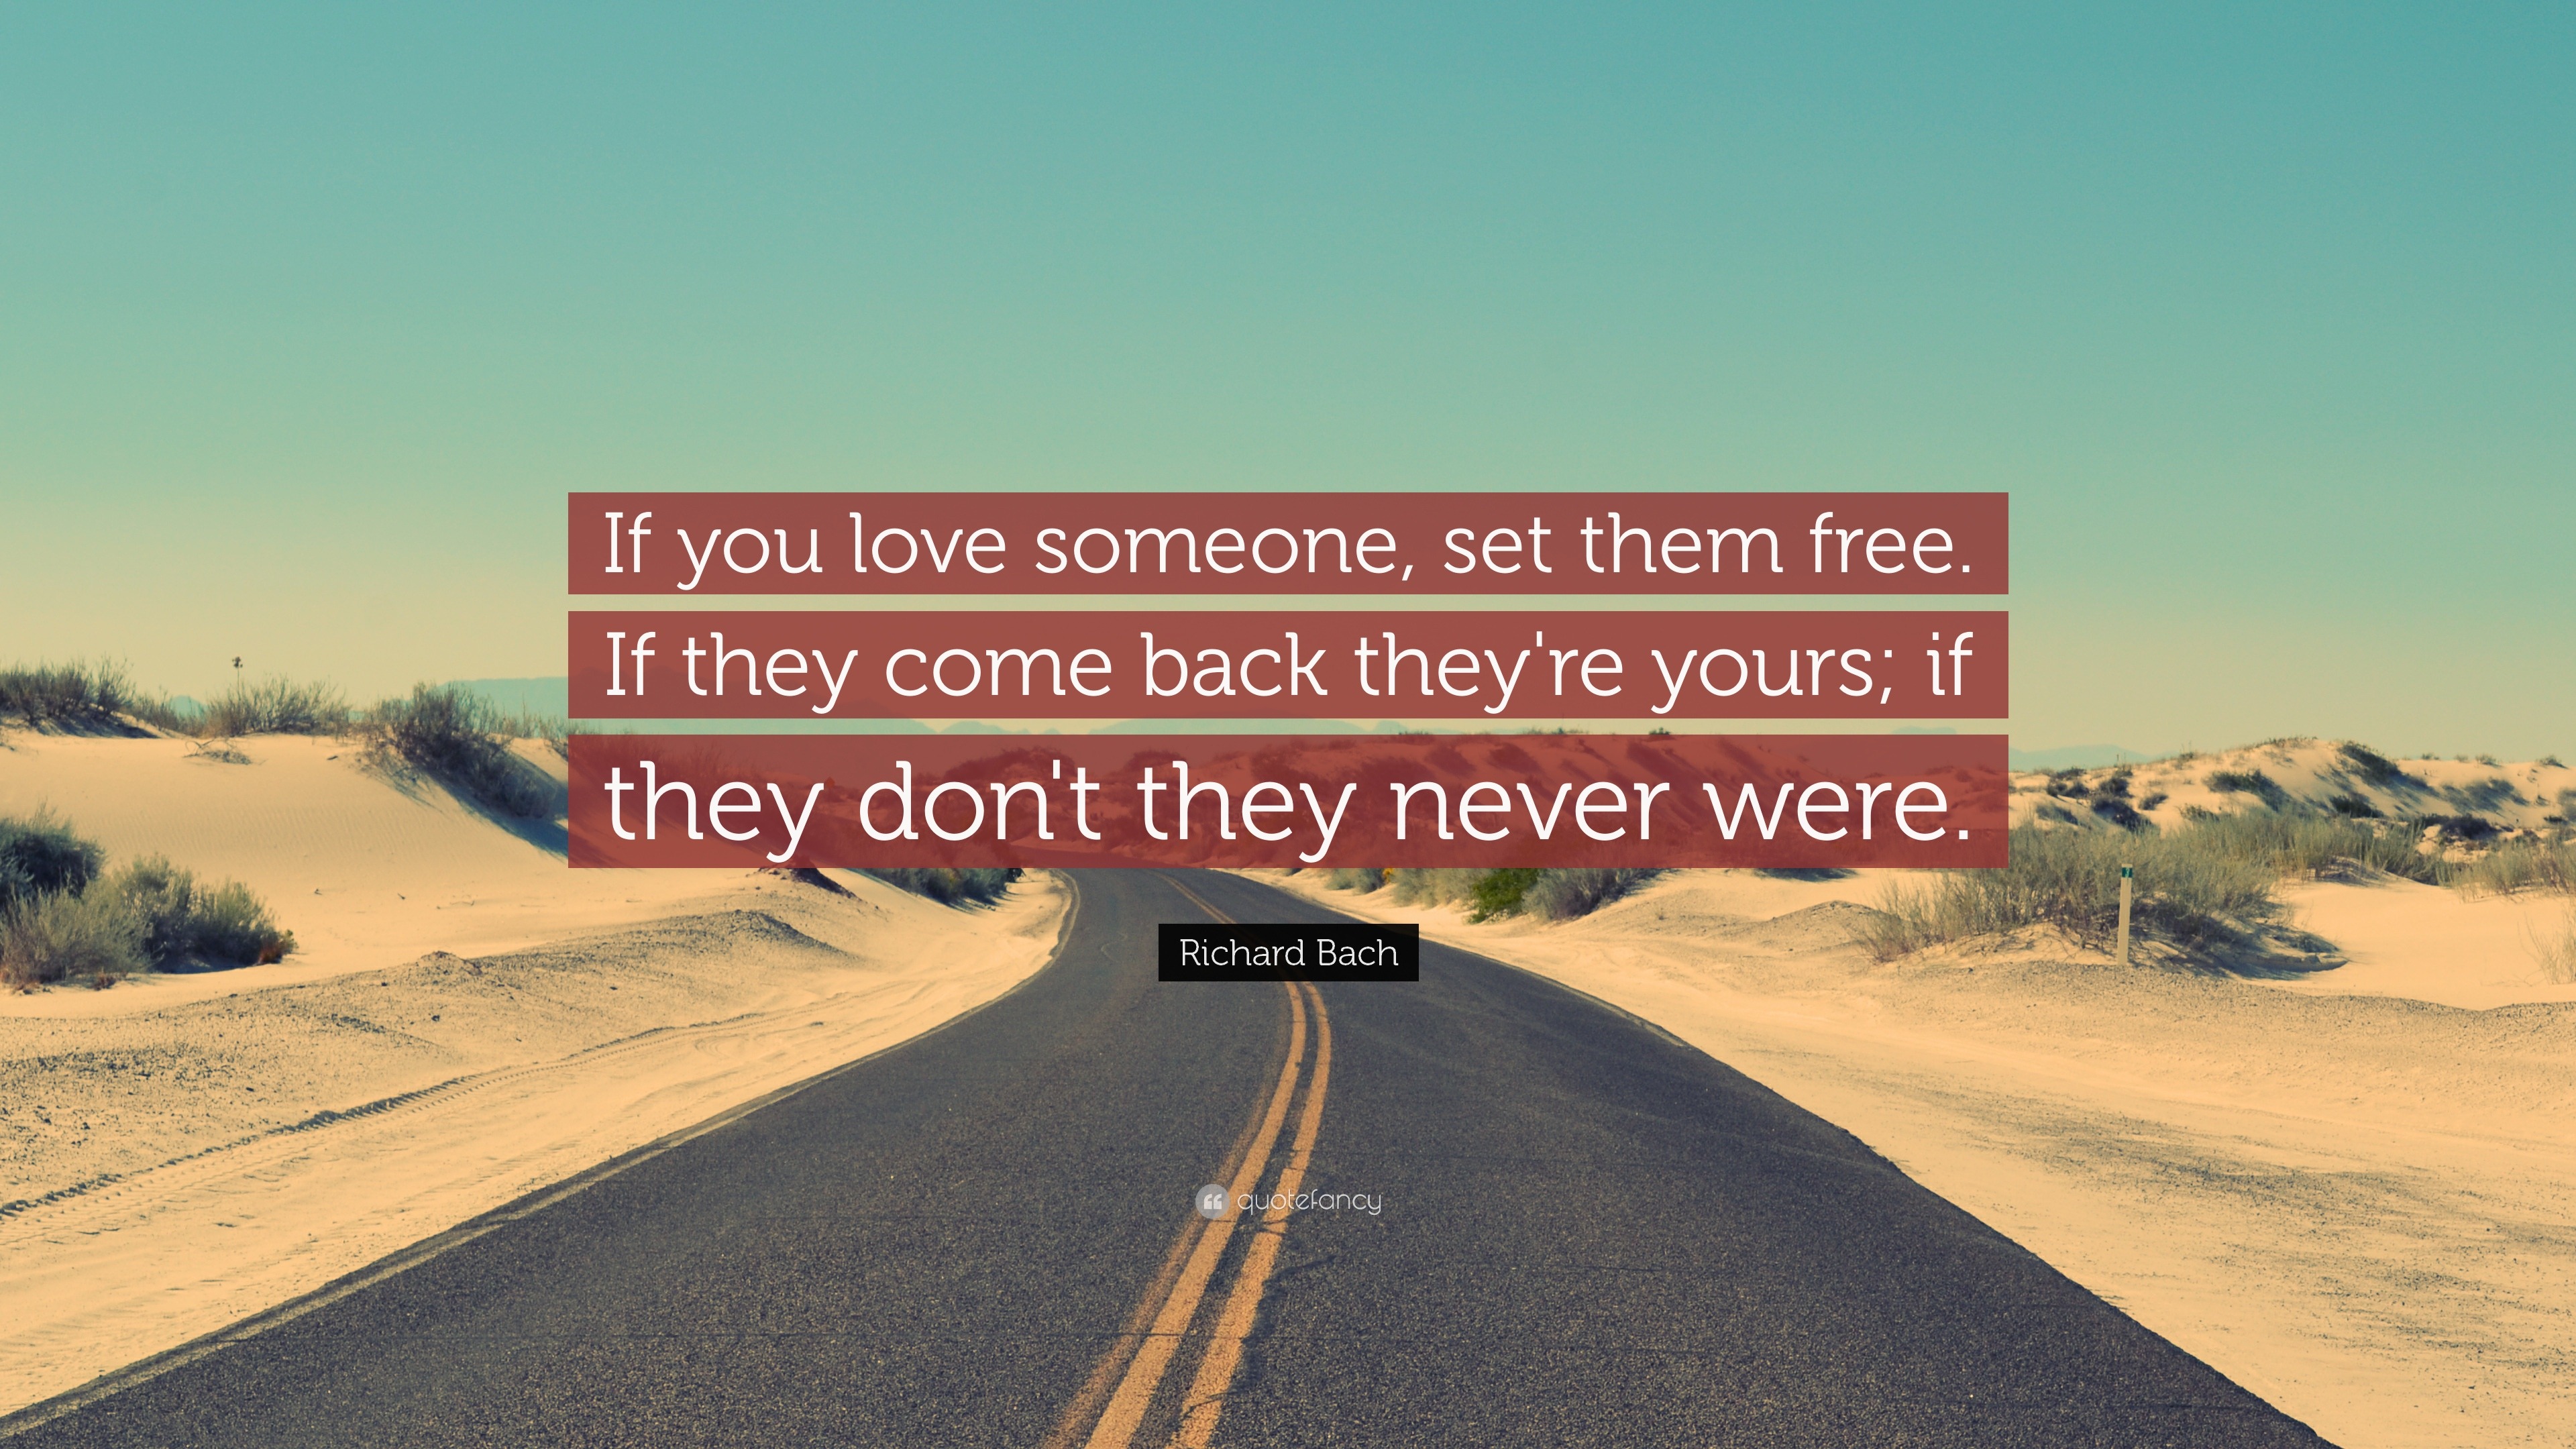 download is it true if you love someone set them free